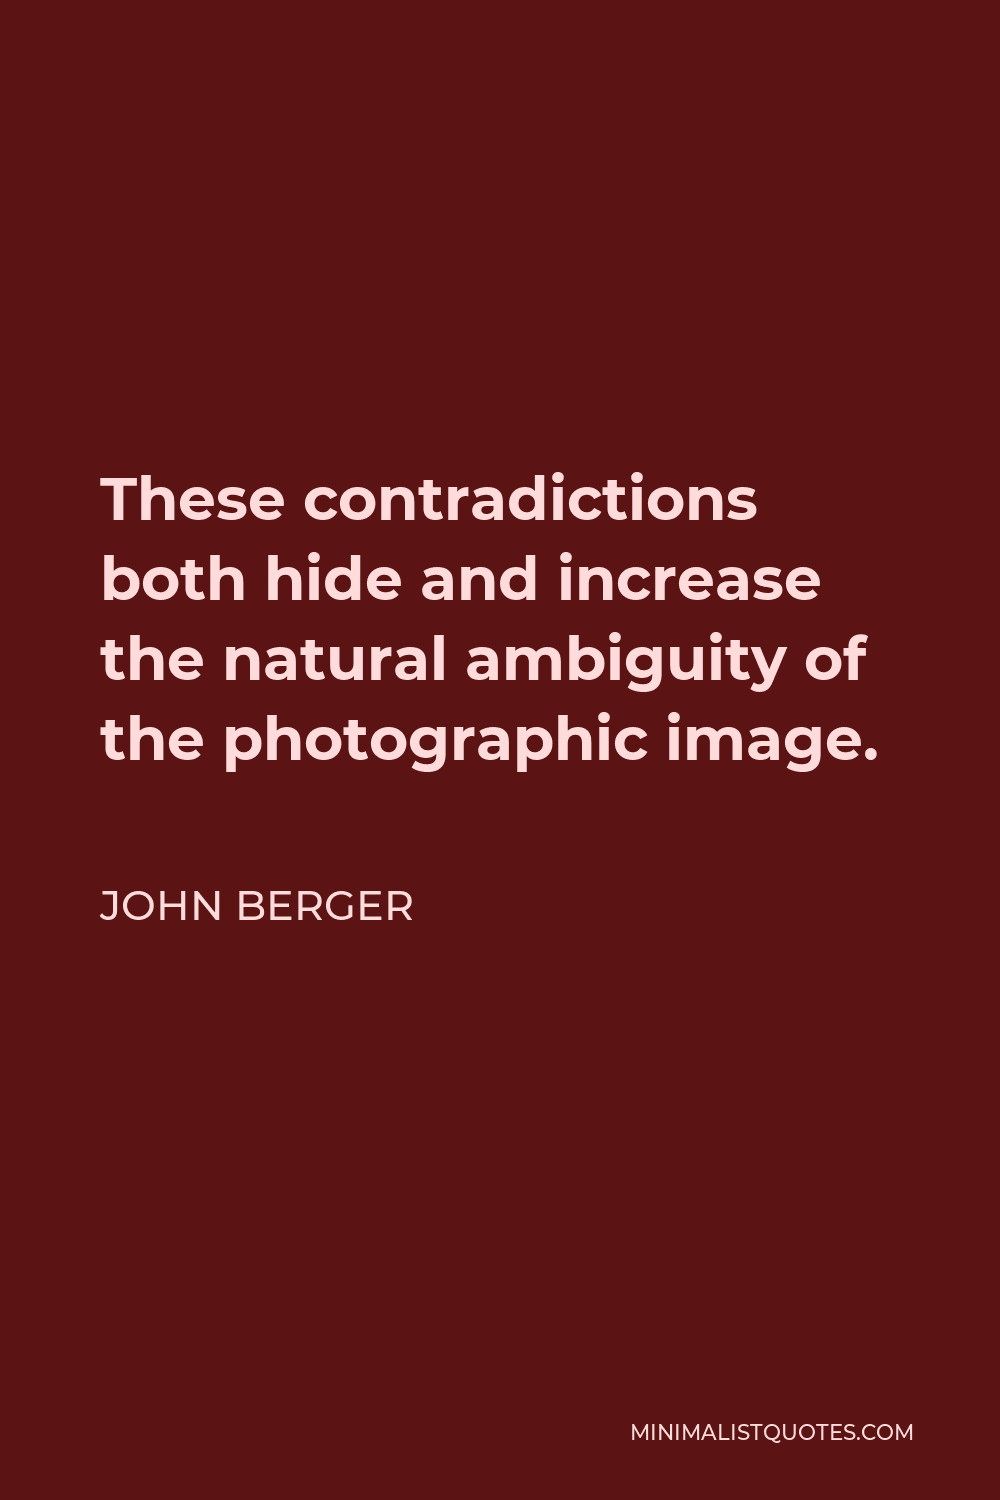 John Berger Quote - These contradictions both hide and increase the natural ambiguity of the photographic image.